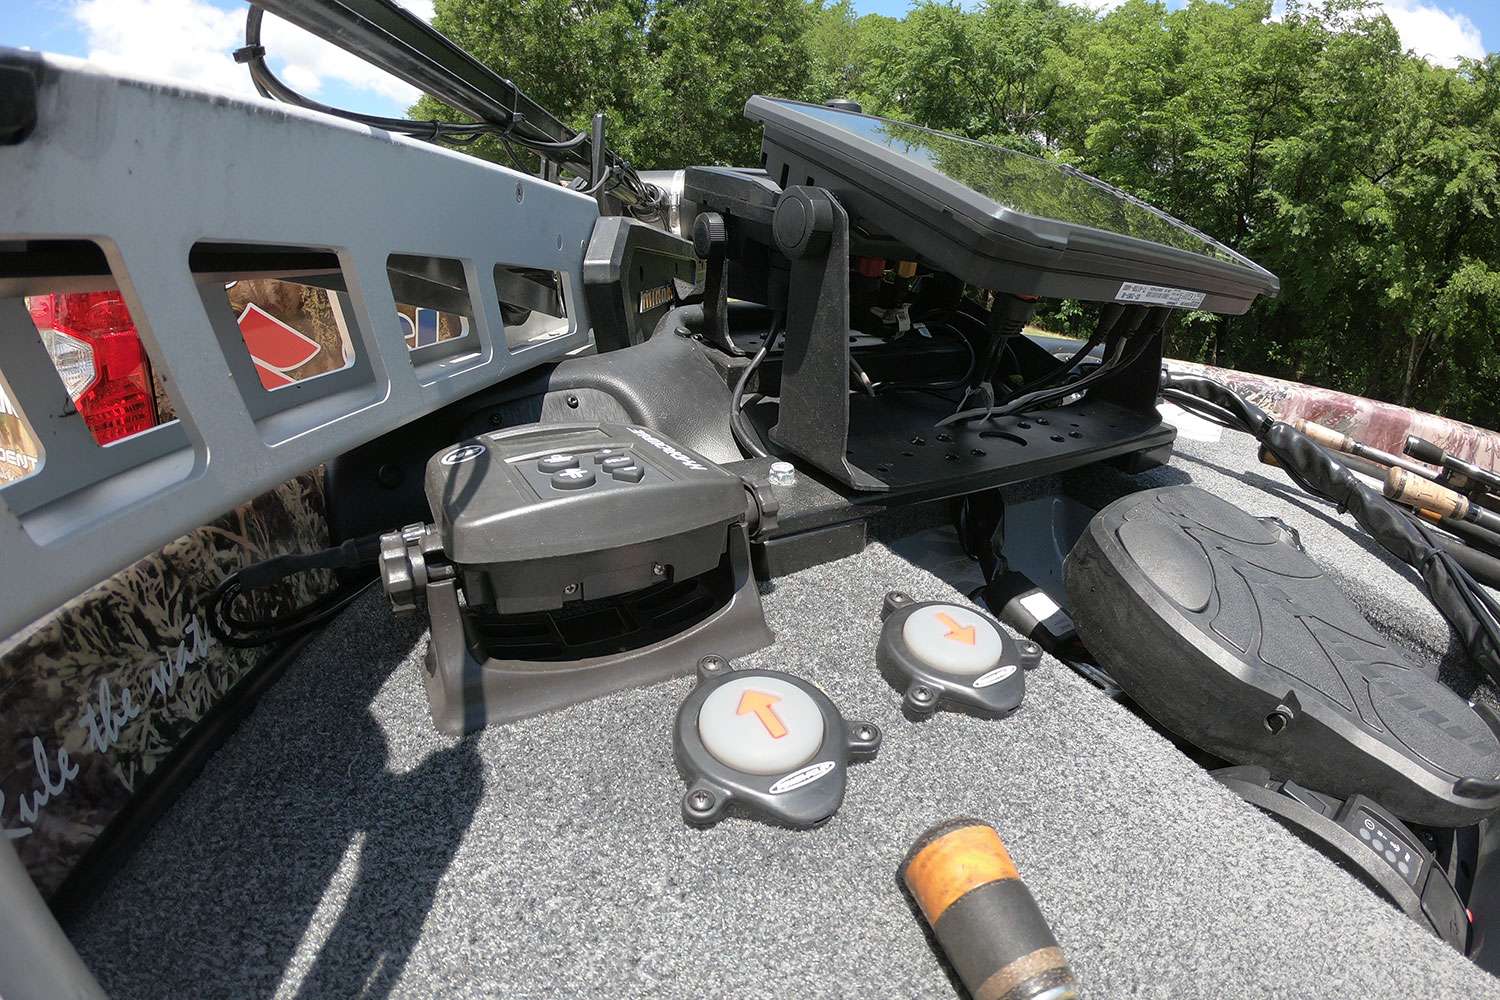 His Power-Pole foot pedals are conveniently located at the left side of his Ultrex pedal.